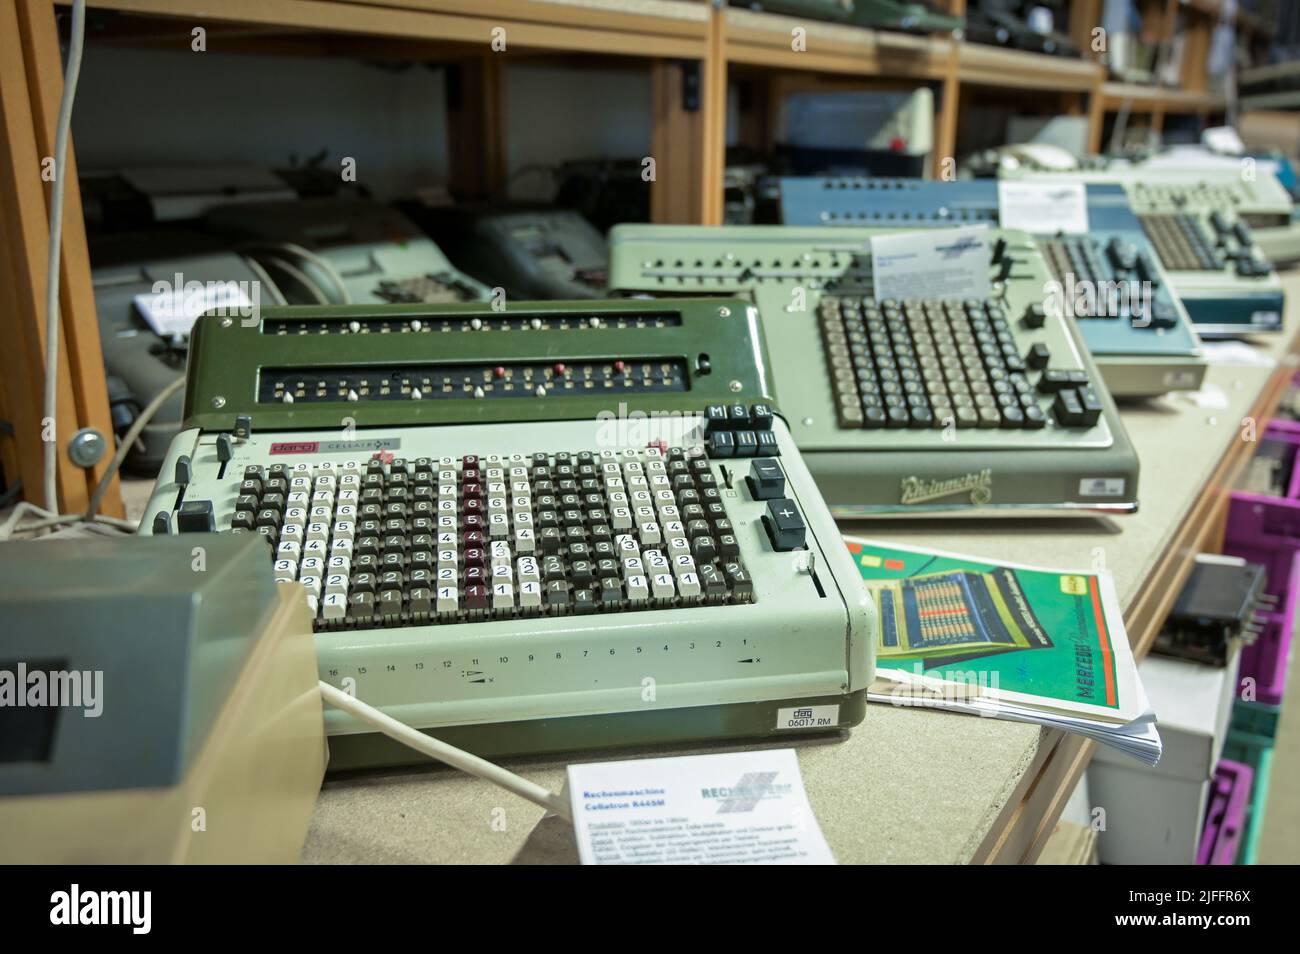 28 June 2022, Saxony-Anhalt, Halle (Saale): The Cellatron R44SM calculating machine. It was built in Zella-Mehlis in the 1950s to 1960s and was designed for addition, subtraction, multiplication and division of large numbers. The Rechenwerk - Computer Museum in Halle exhibits computing and automation technology devices primarily from East Germany. (to dpa 'Unique memories of the beginning of the computer age') Photo: Heiko Rebsch/dpa Stock Photo